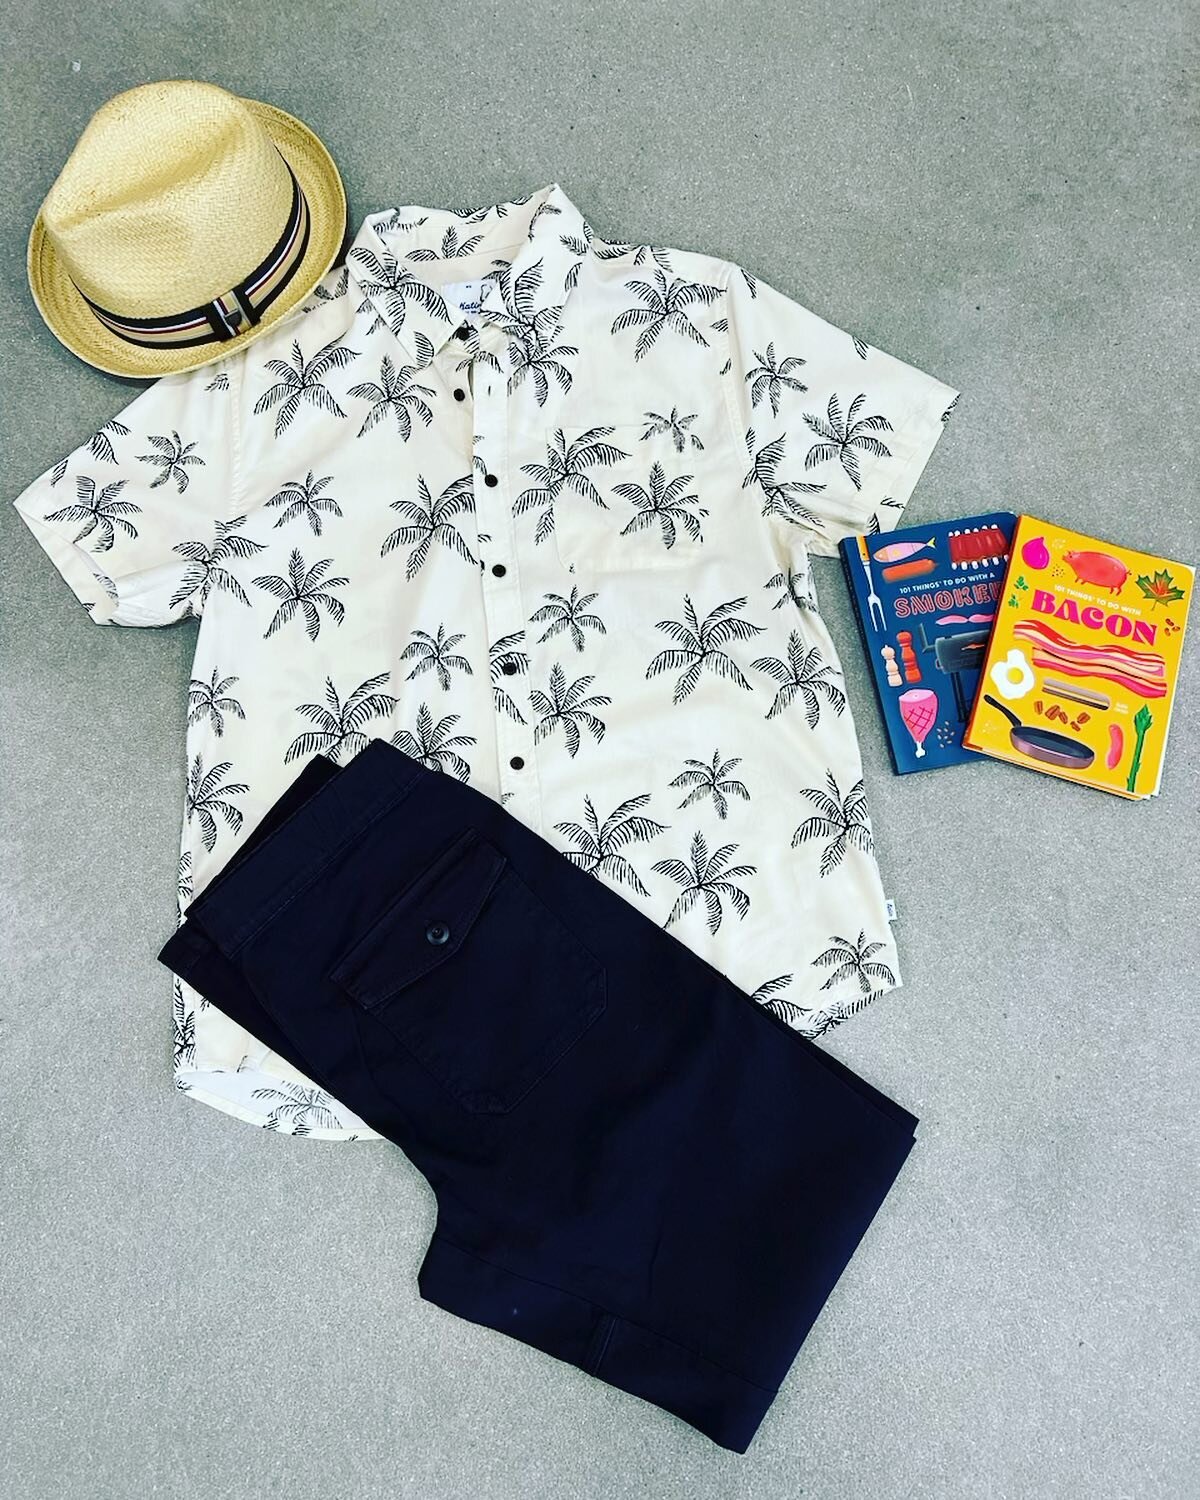 Do you have your backyard BBQ outfit picked for Summer? Or vacation bound ? New board shorts hit the shop too!! 

Pants: All View 
Top: Katin
Hat : Brixton Straw